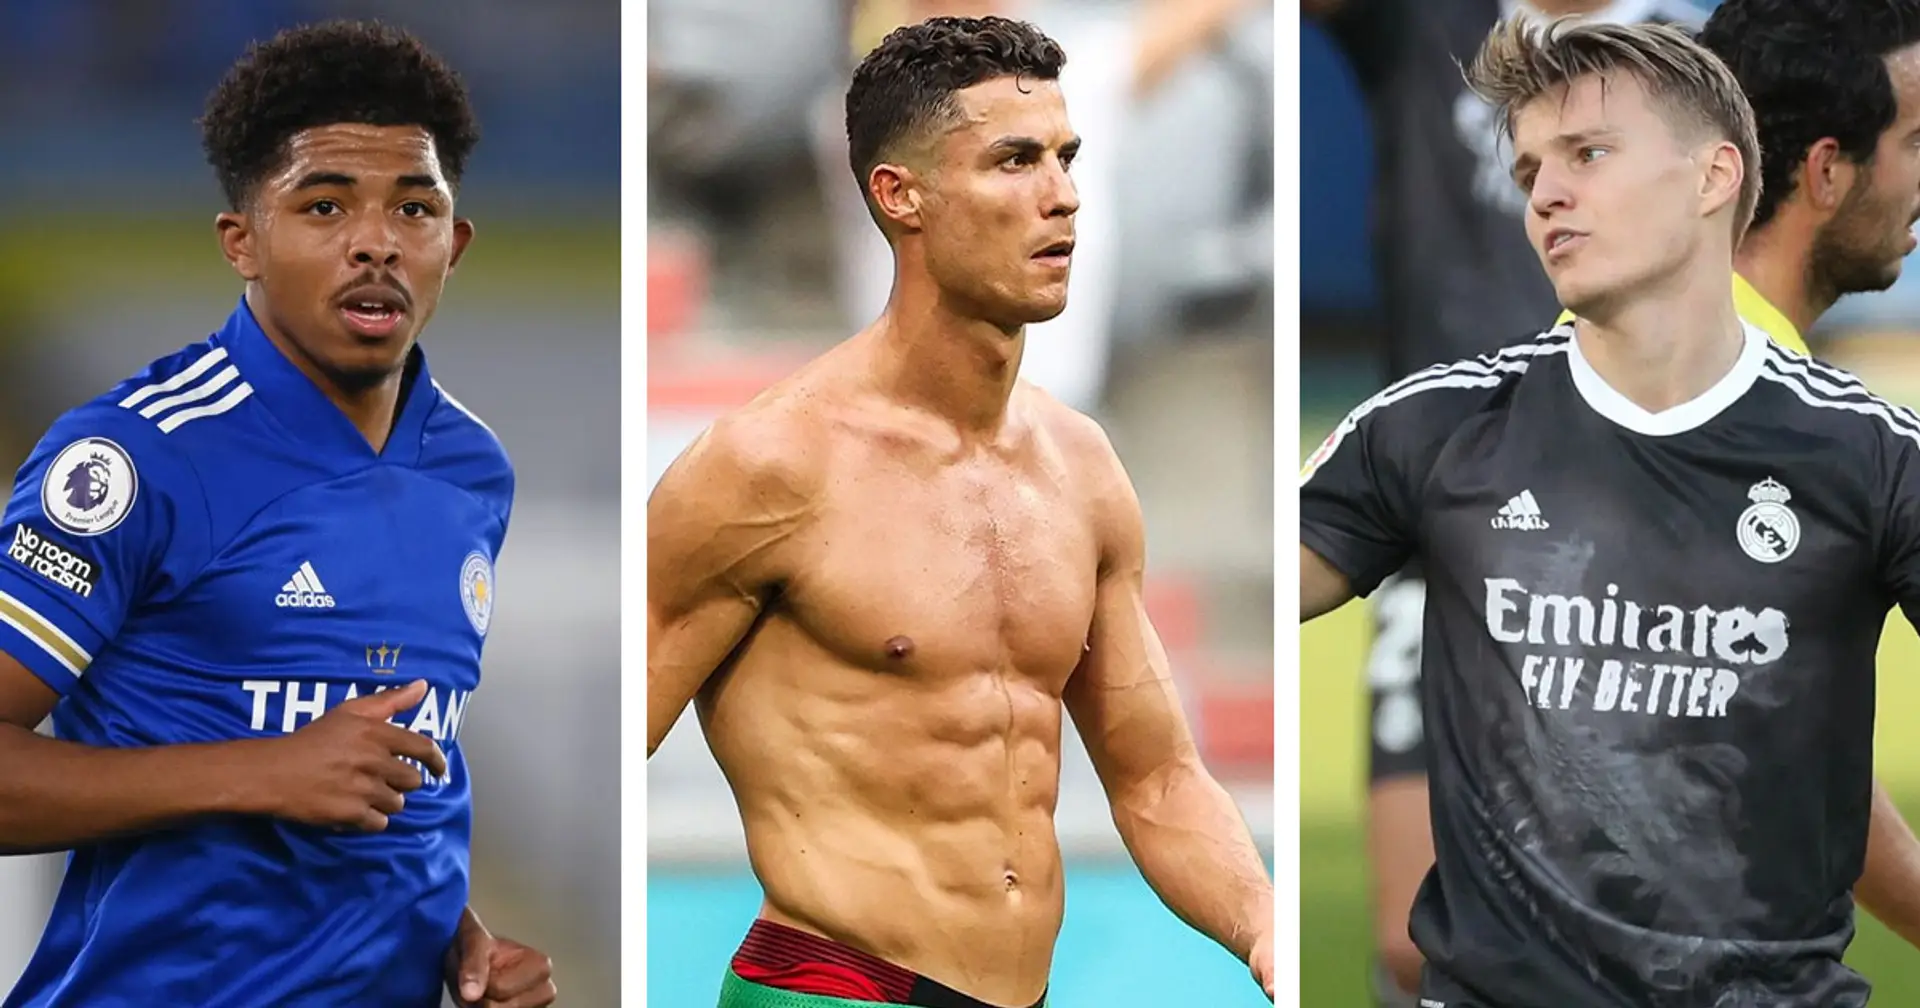 Cristiano Ronaldo hopes to join Real Madrid & 3 other big stories you might've missed